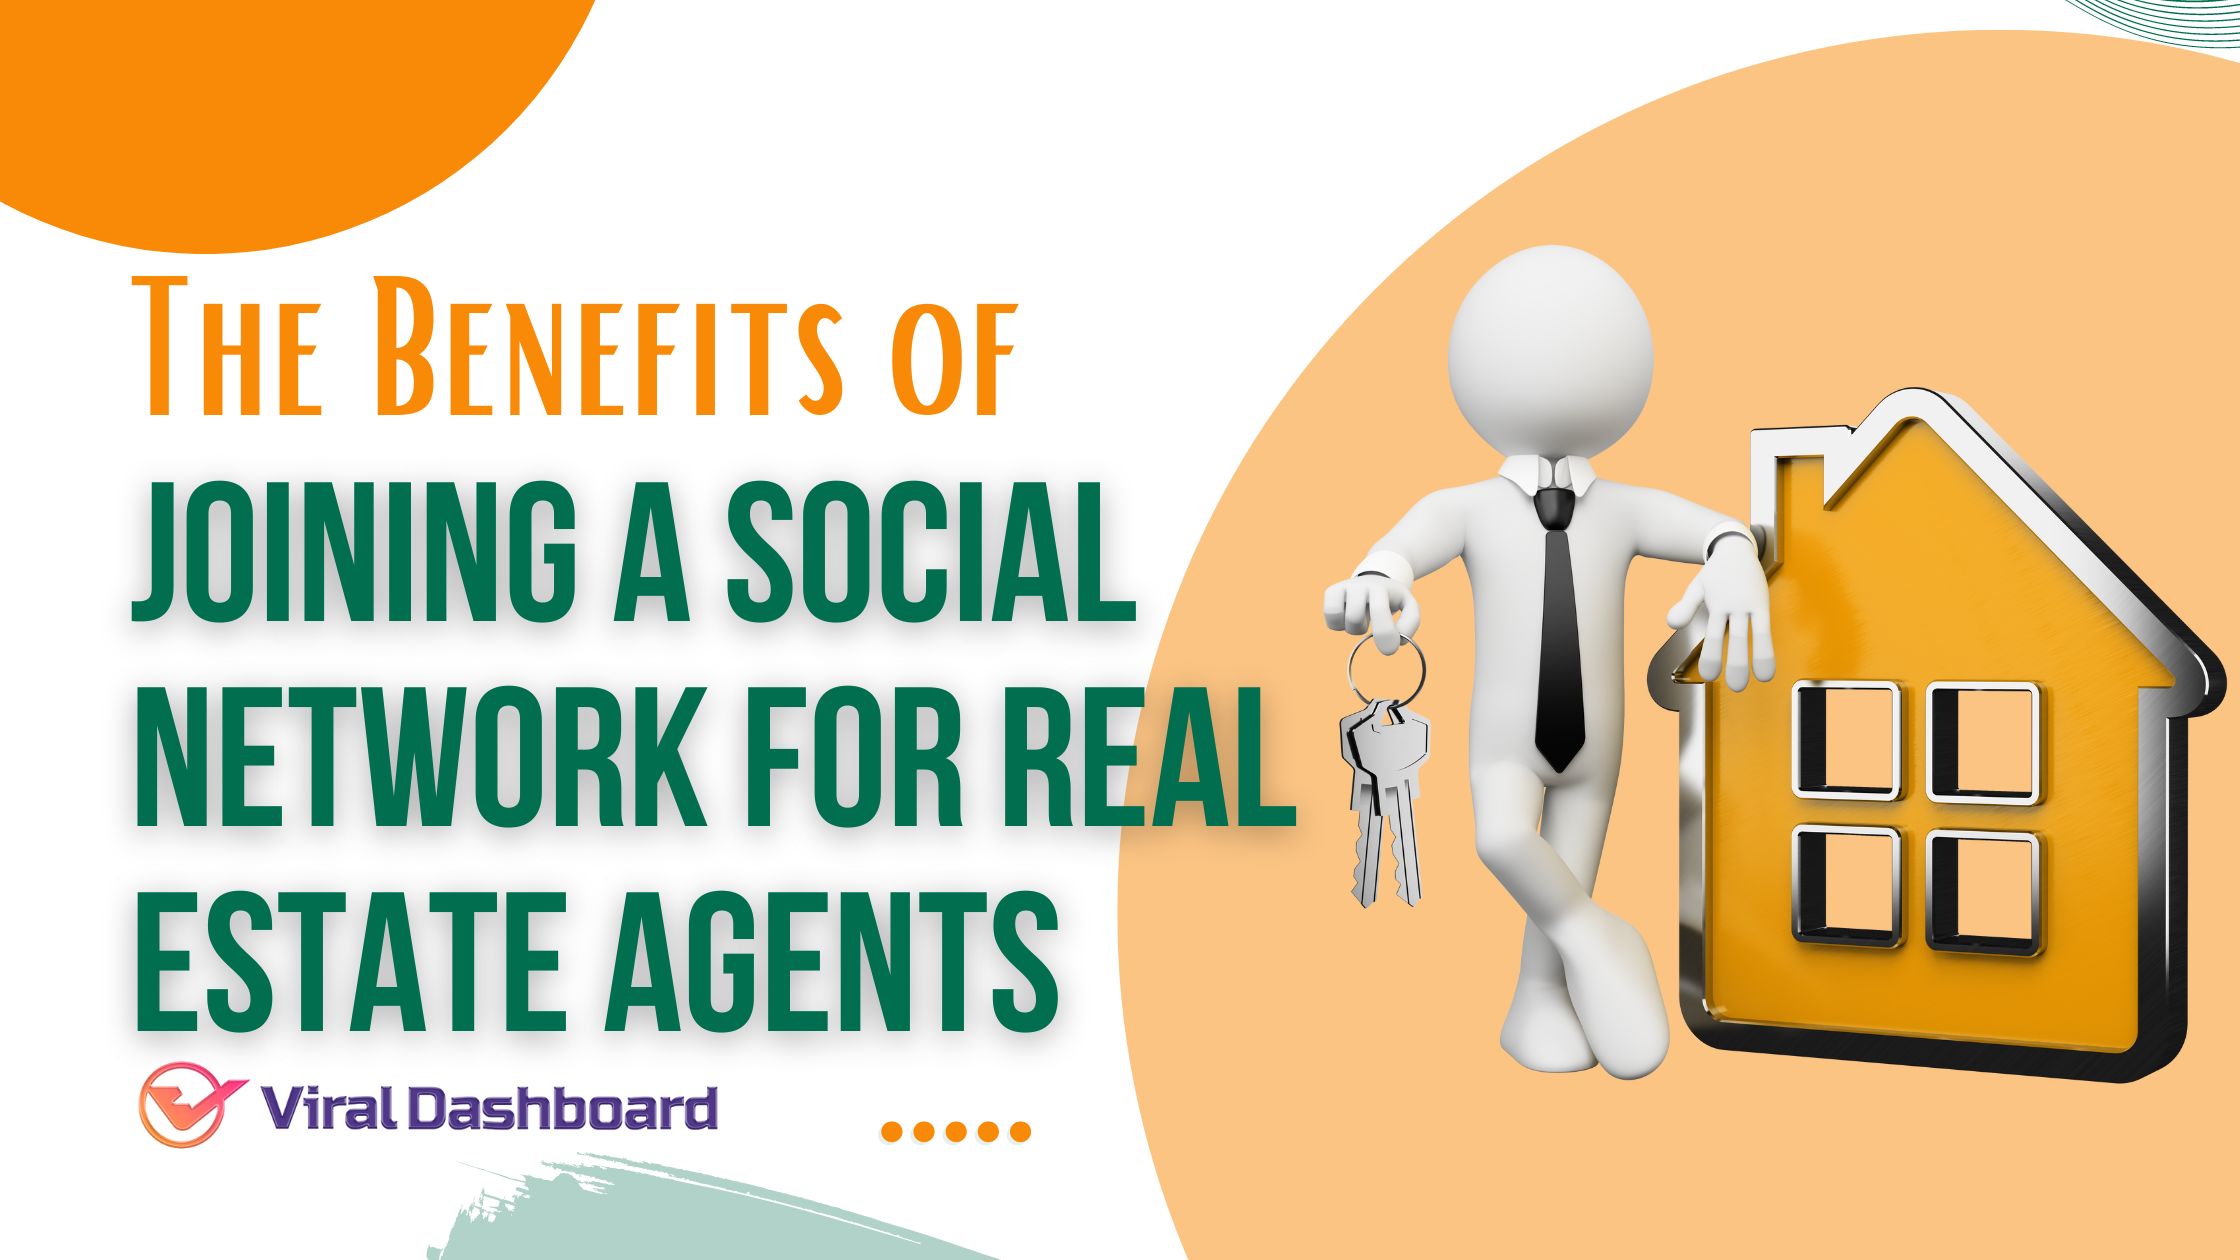 The Benefits of Joining a Social Network for Real Estate Agents